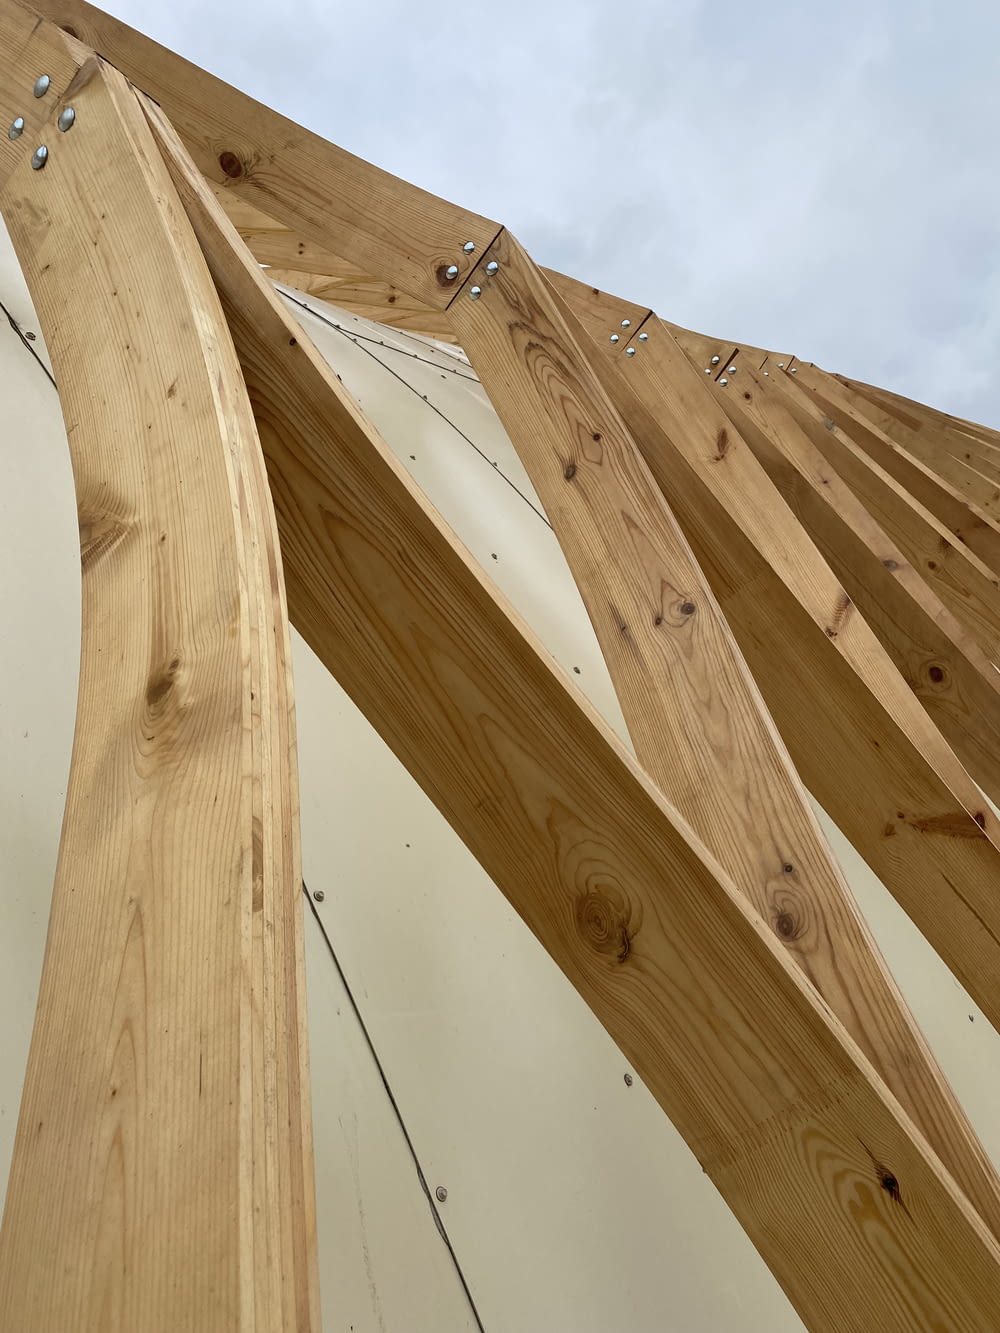 a close up of a wooden structure with a sky background